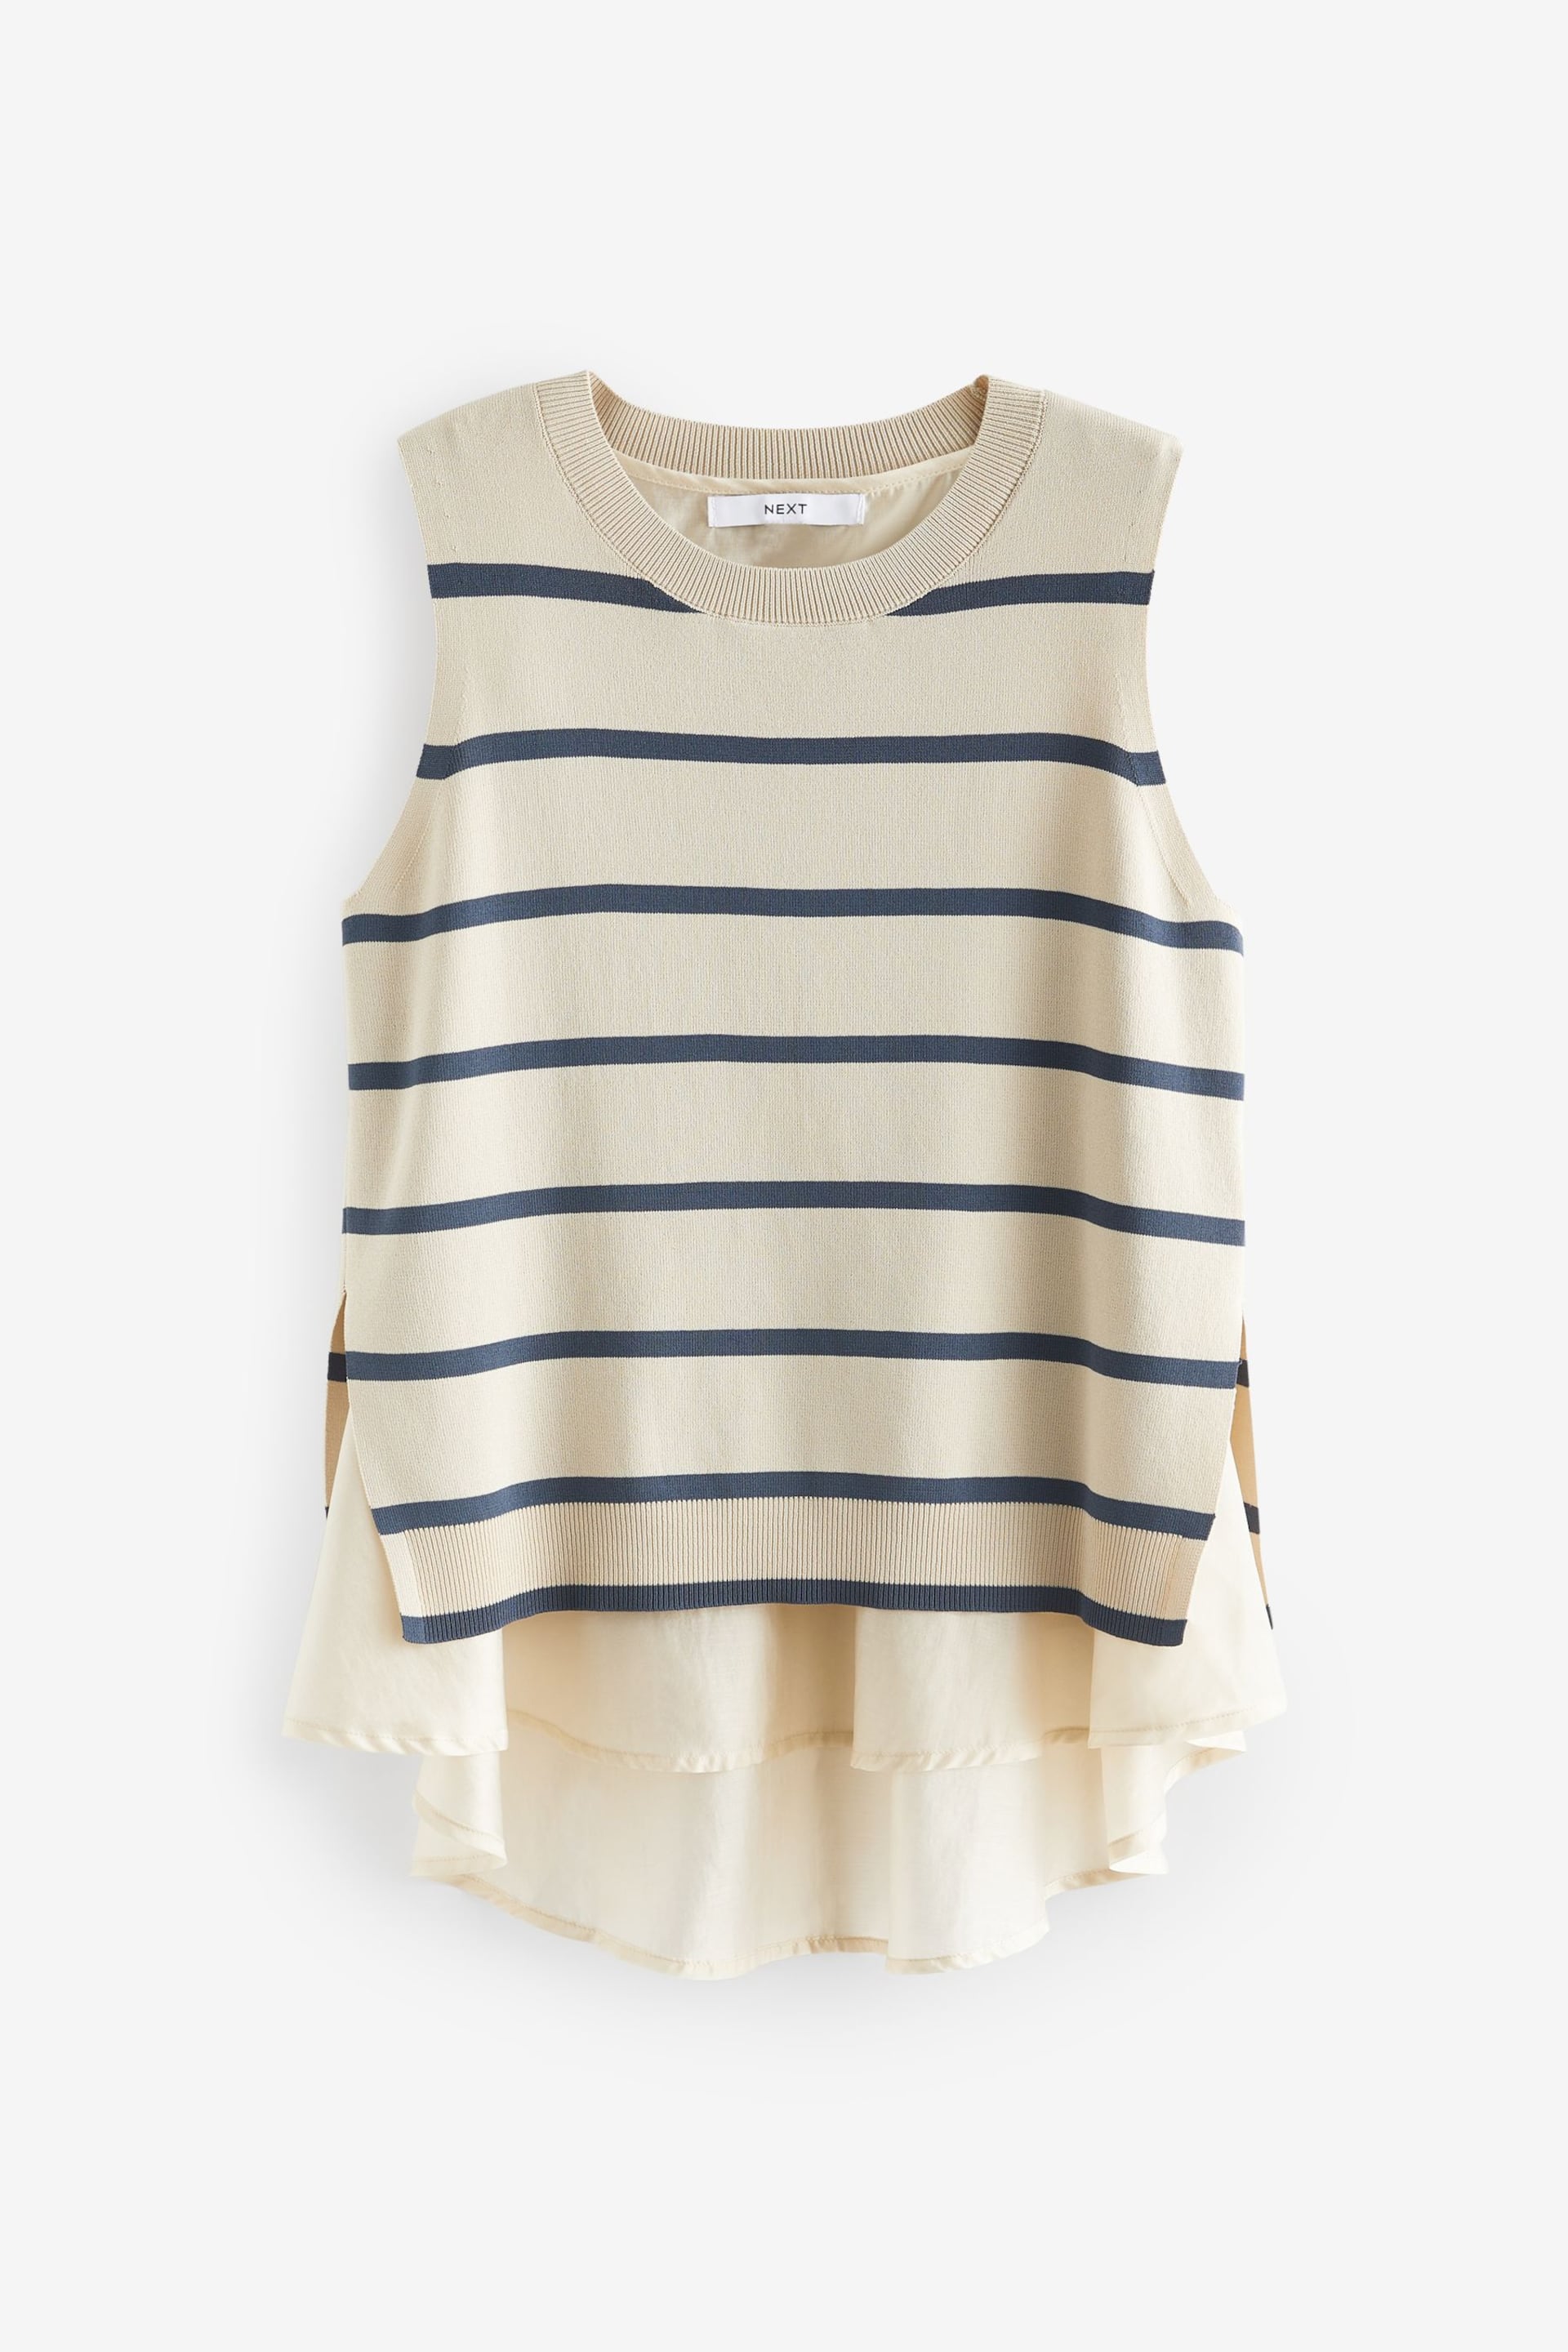 Navy Blue Stripe Woven Mix Sleeveless Layer Top - Image 5 of 6